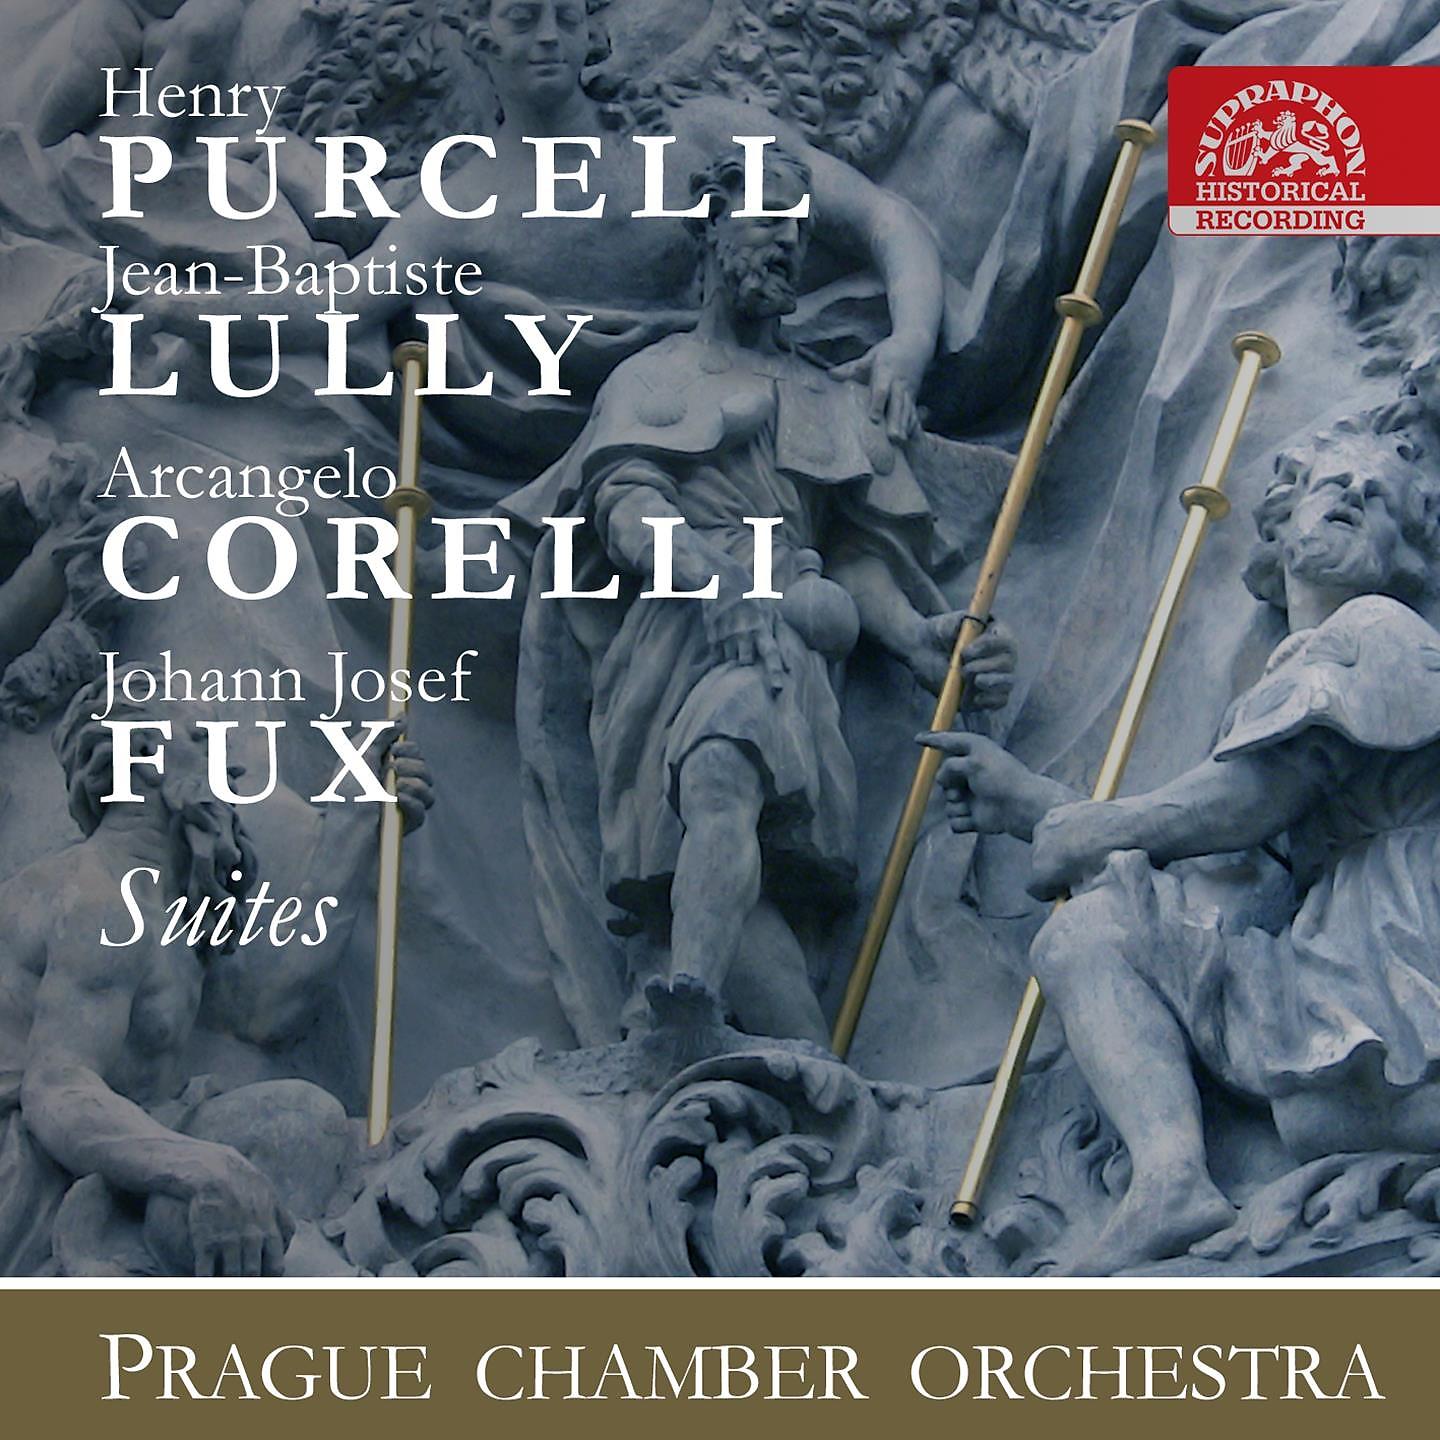 Постер альбома Purcell, Lully, Corelli, Fux: Suites